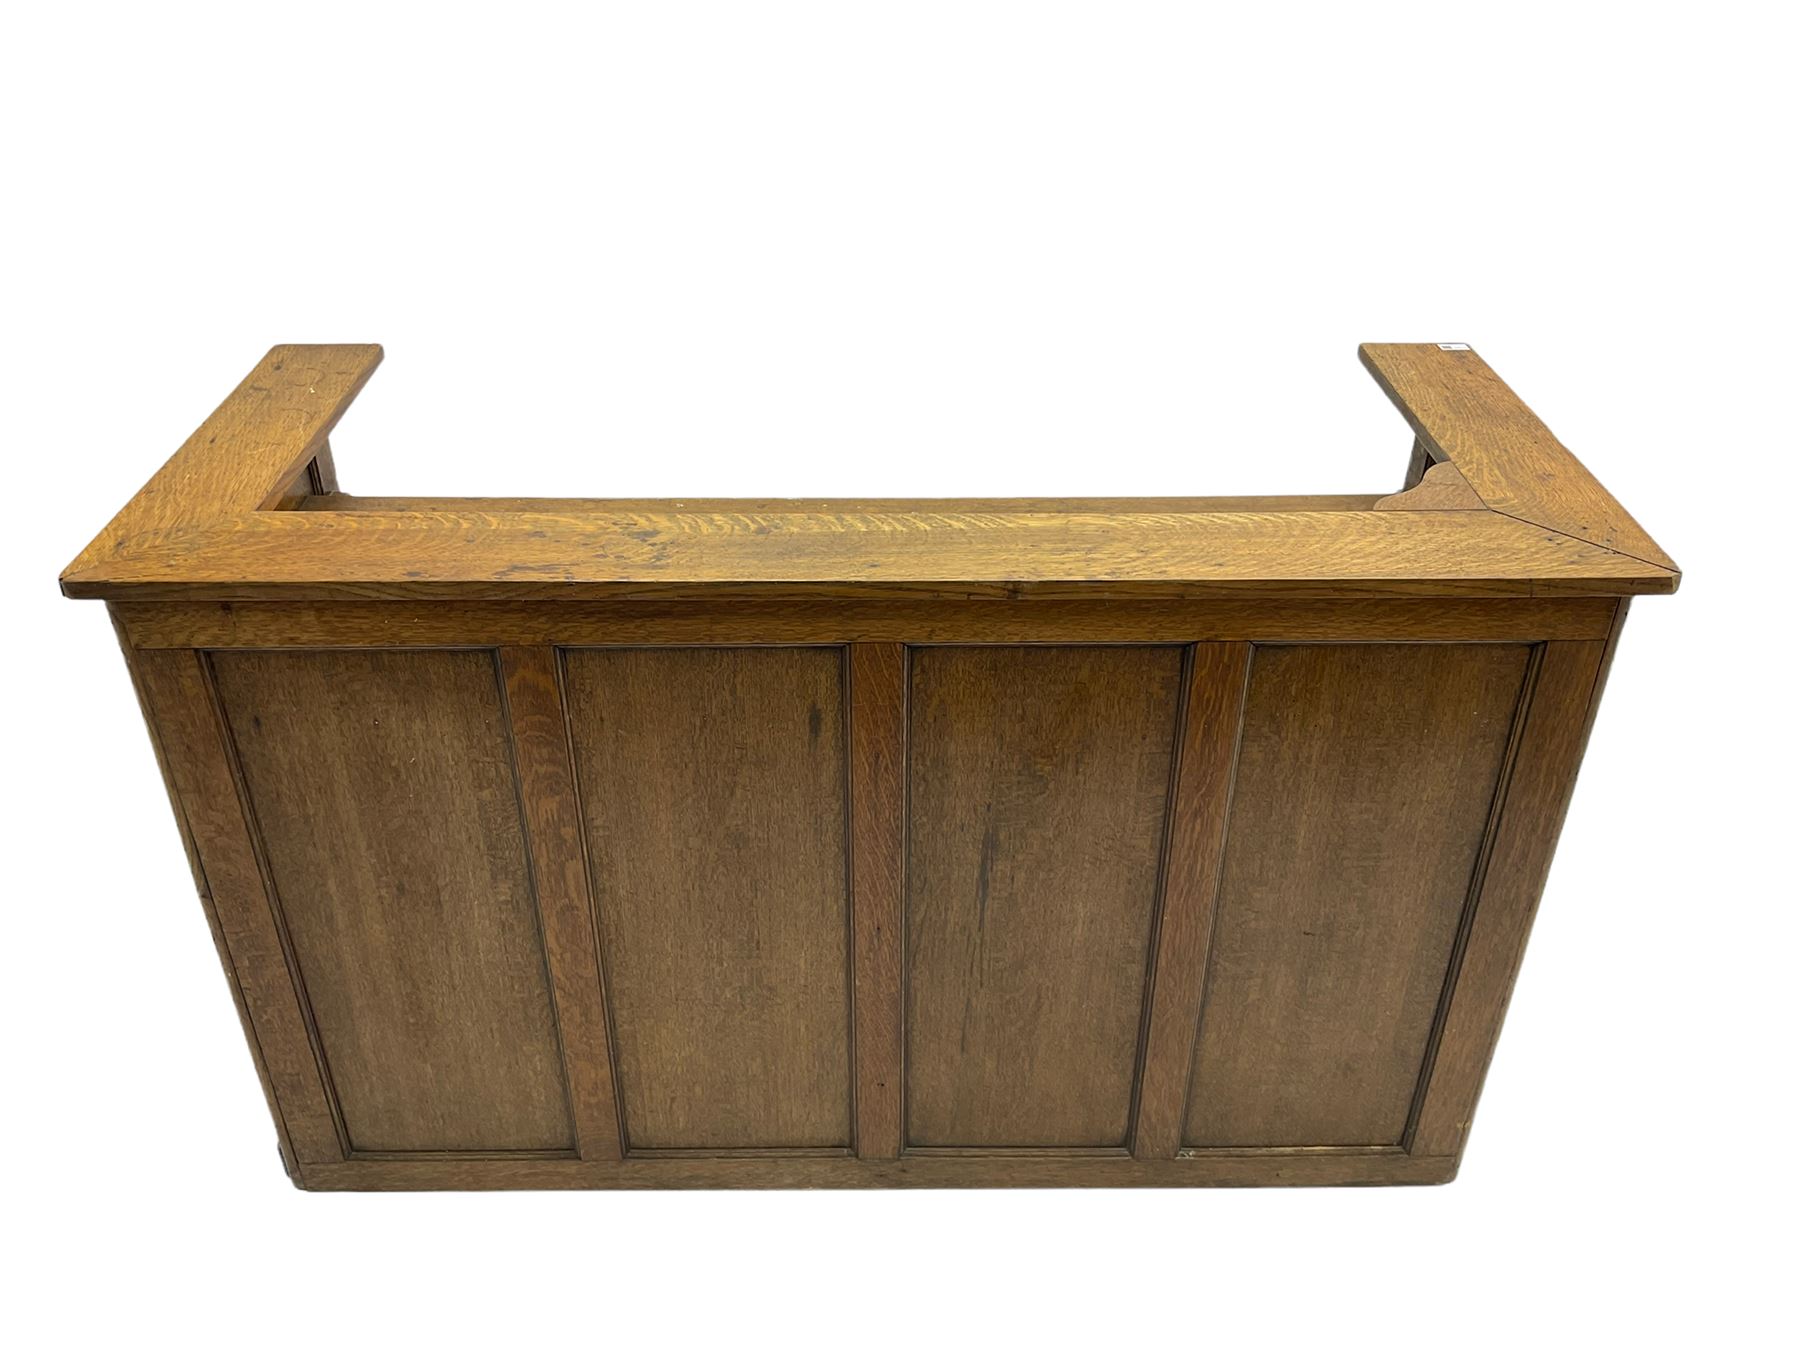 Early 20th century oak rostrum or clerks stand - Image 6 of 7